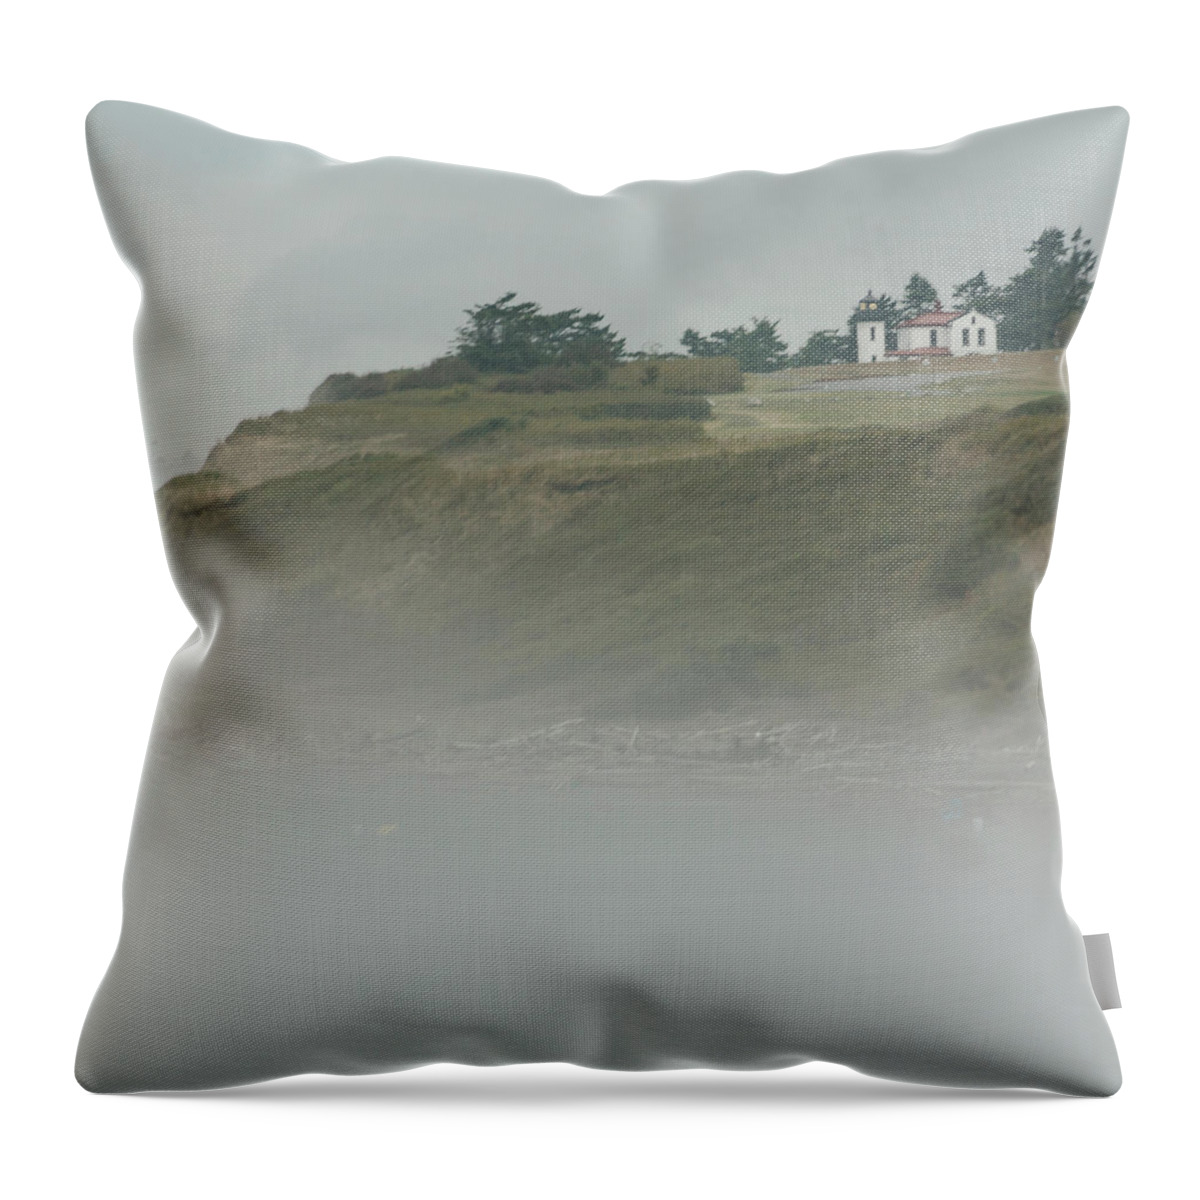 Ft. Casey Throw Pillow featuring the photograph Ft. Casey Lighthouse by Tony Locke